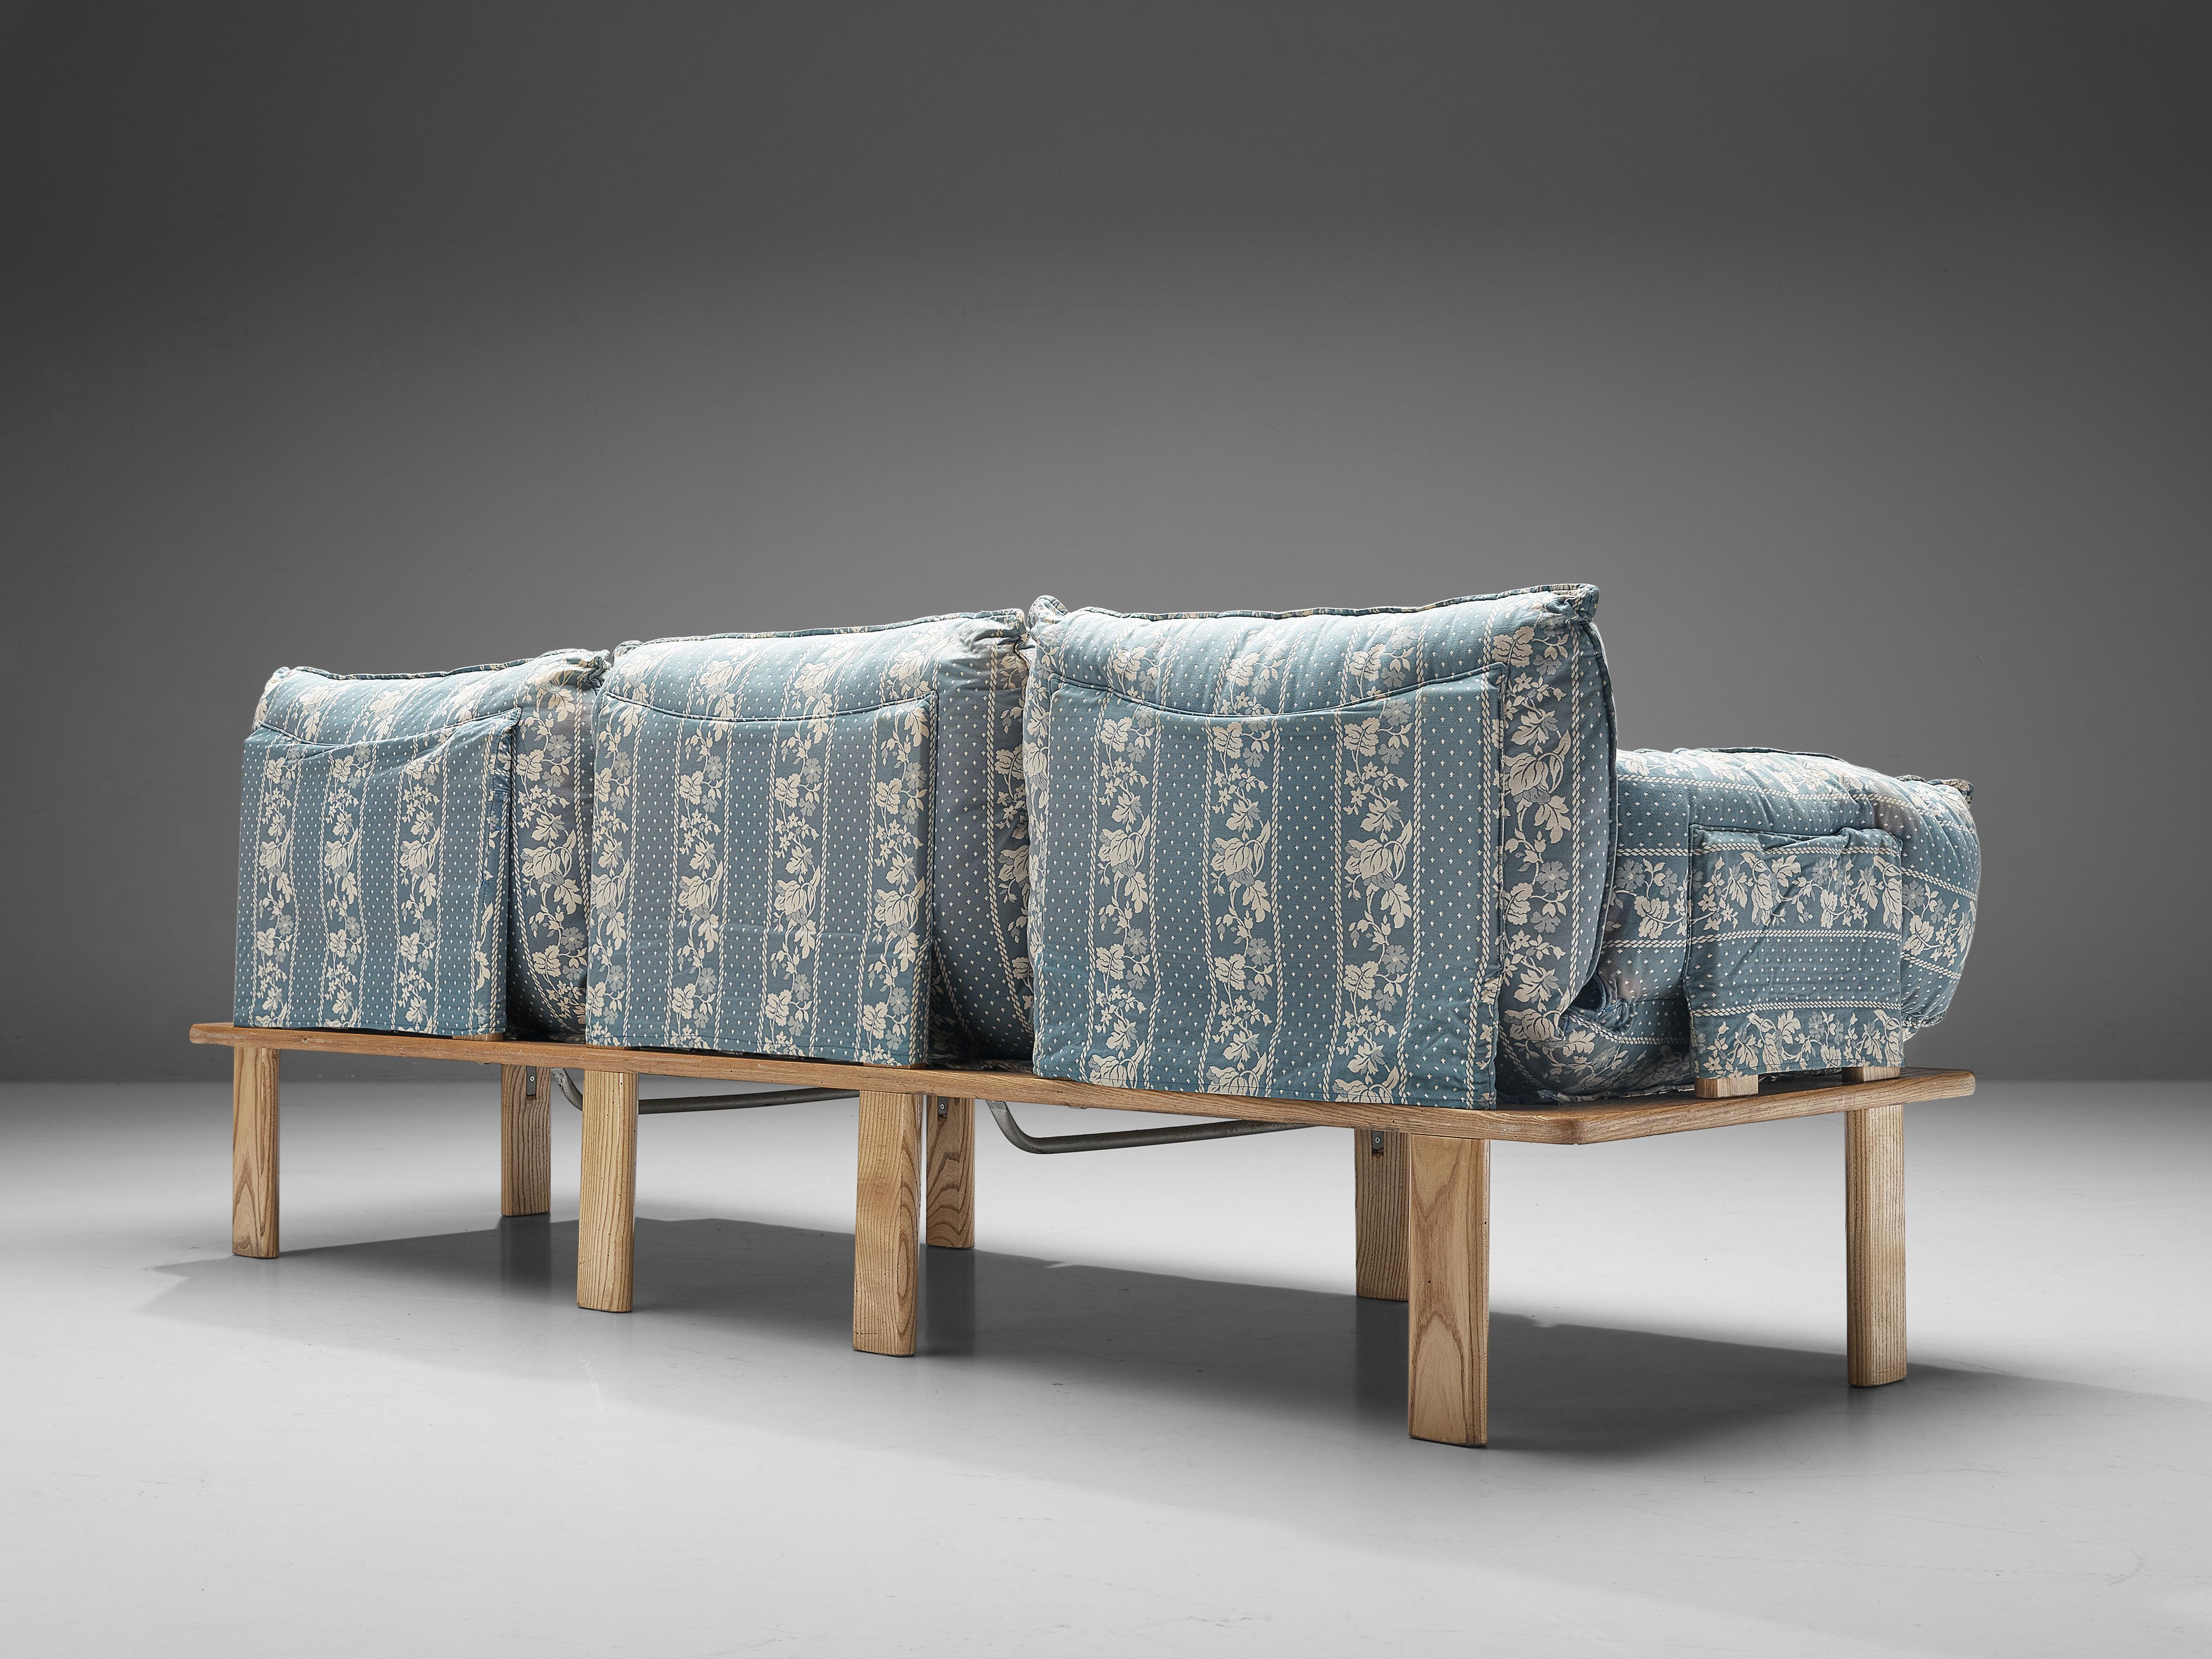 Late 20th Century Giovanni Offredi for Saporiti Sofa in Floral Upholstery and Ash